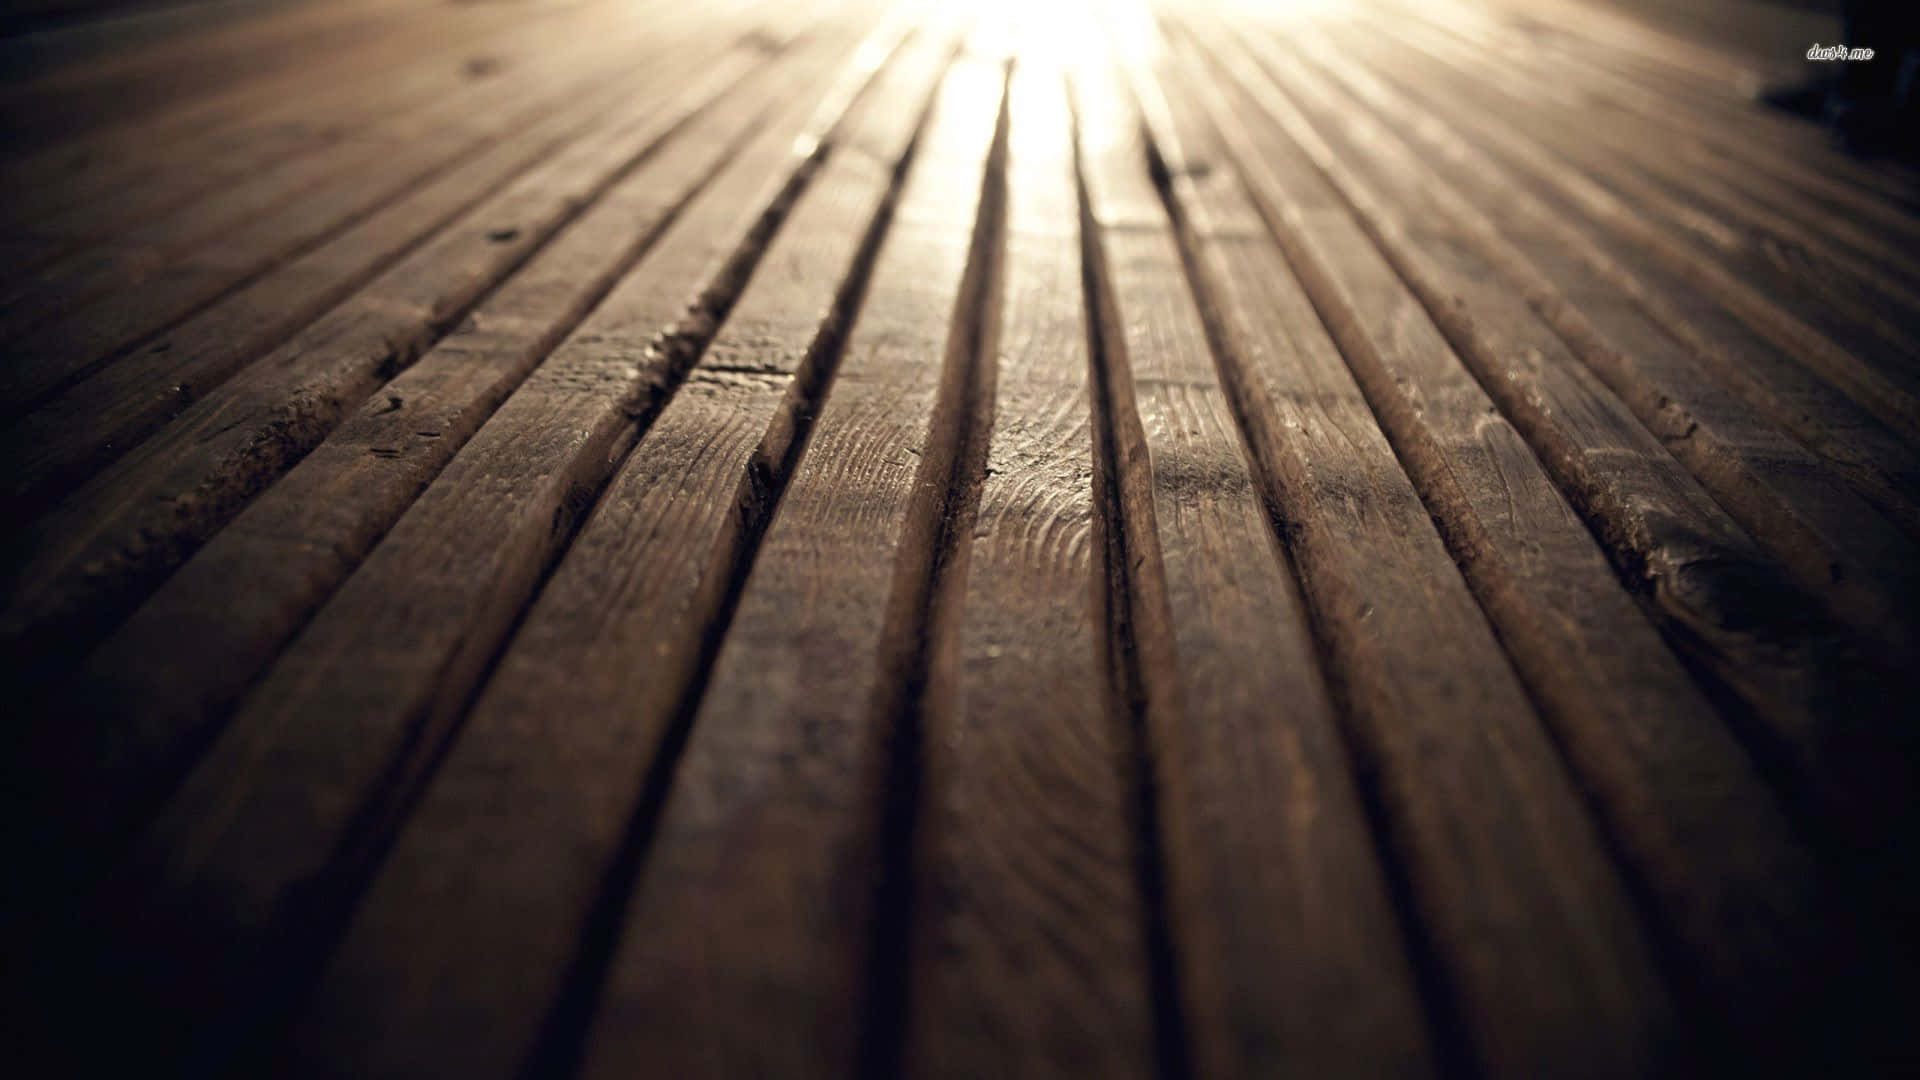 A Wooden Floor With A Light Shining On It